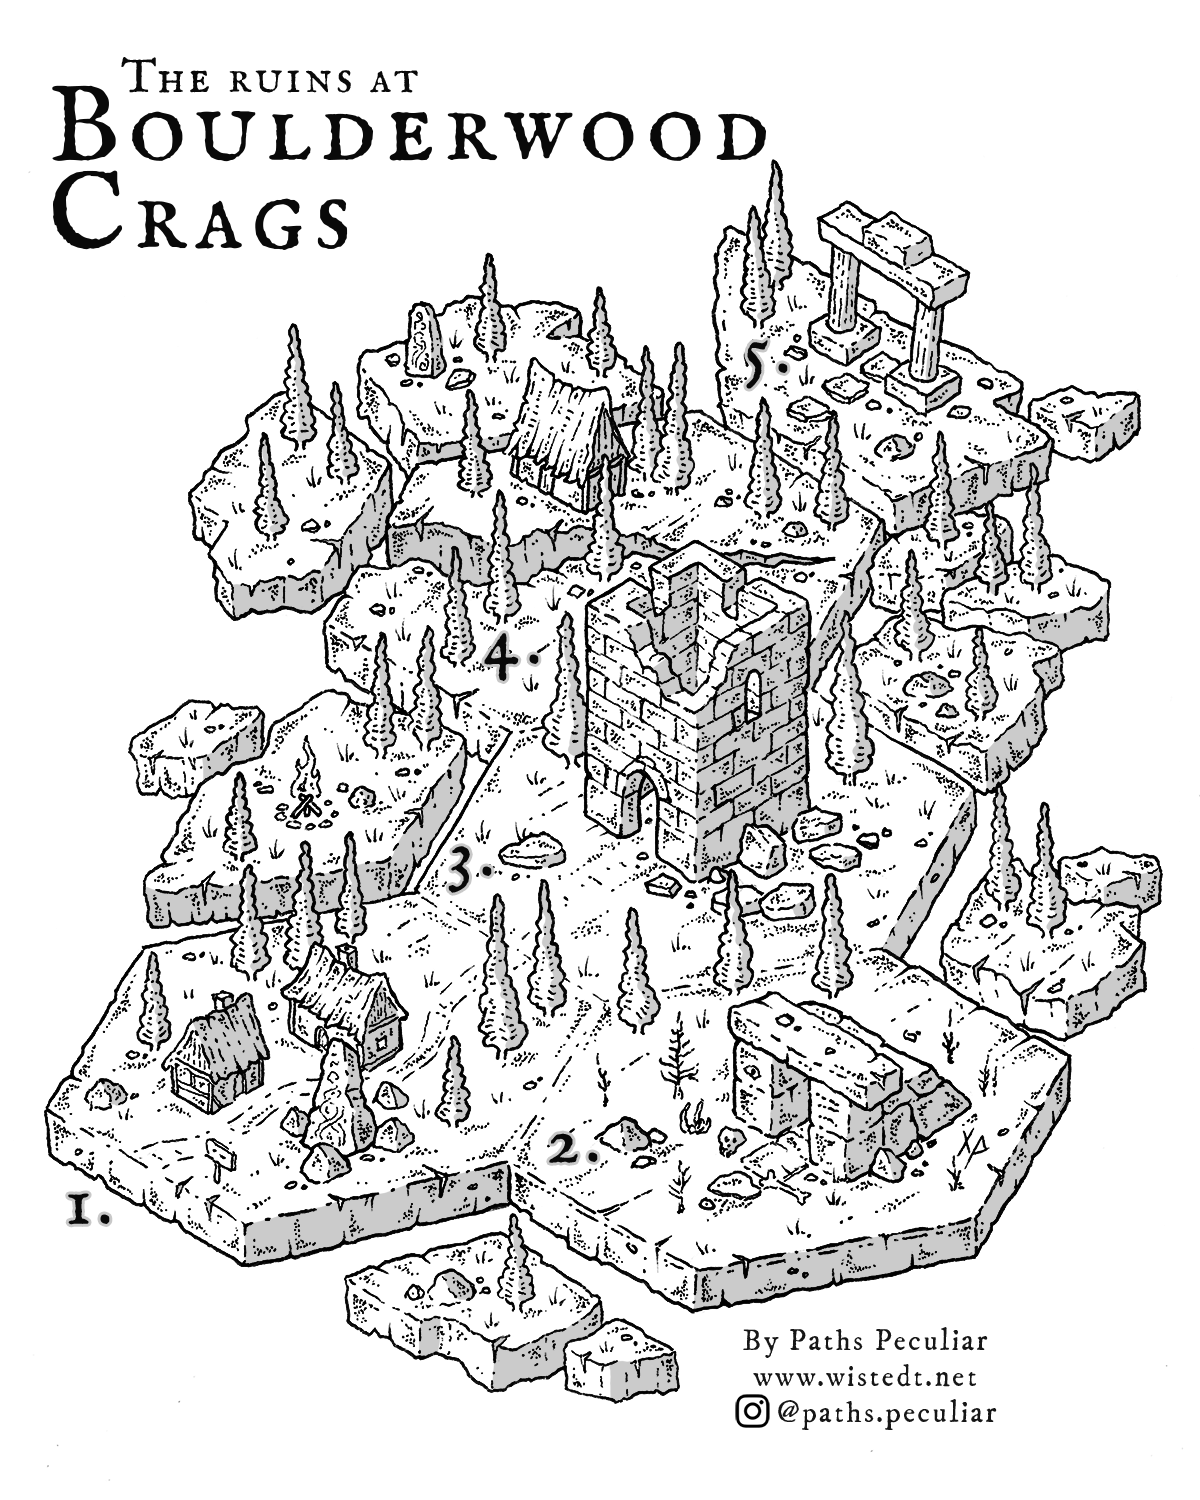 Isometric hex map – the ruins at Boulderwood Crags